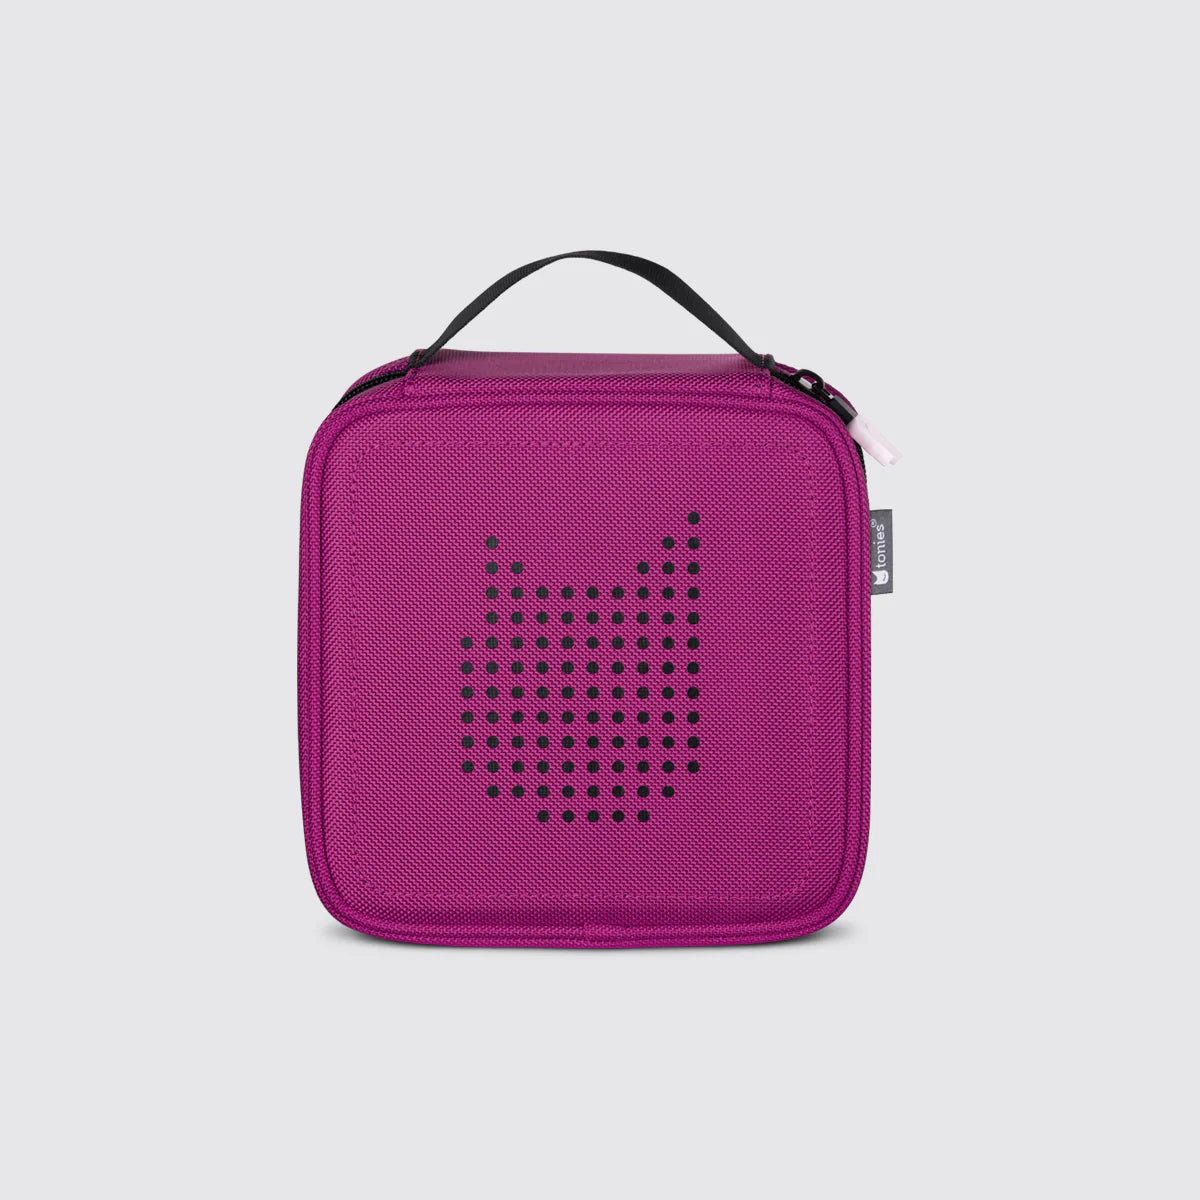 Carrying Case- Purple by Tonies #10001206